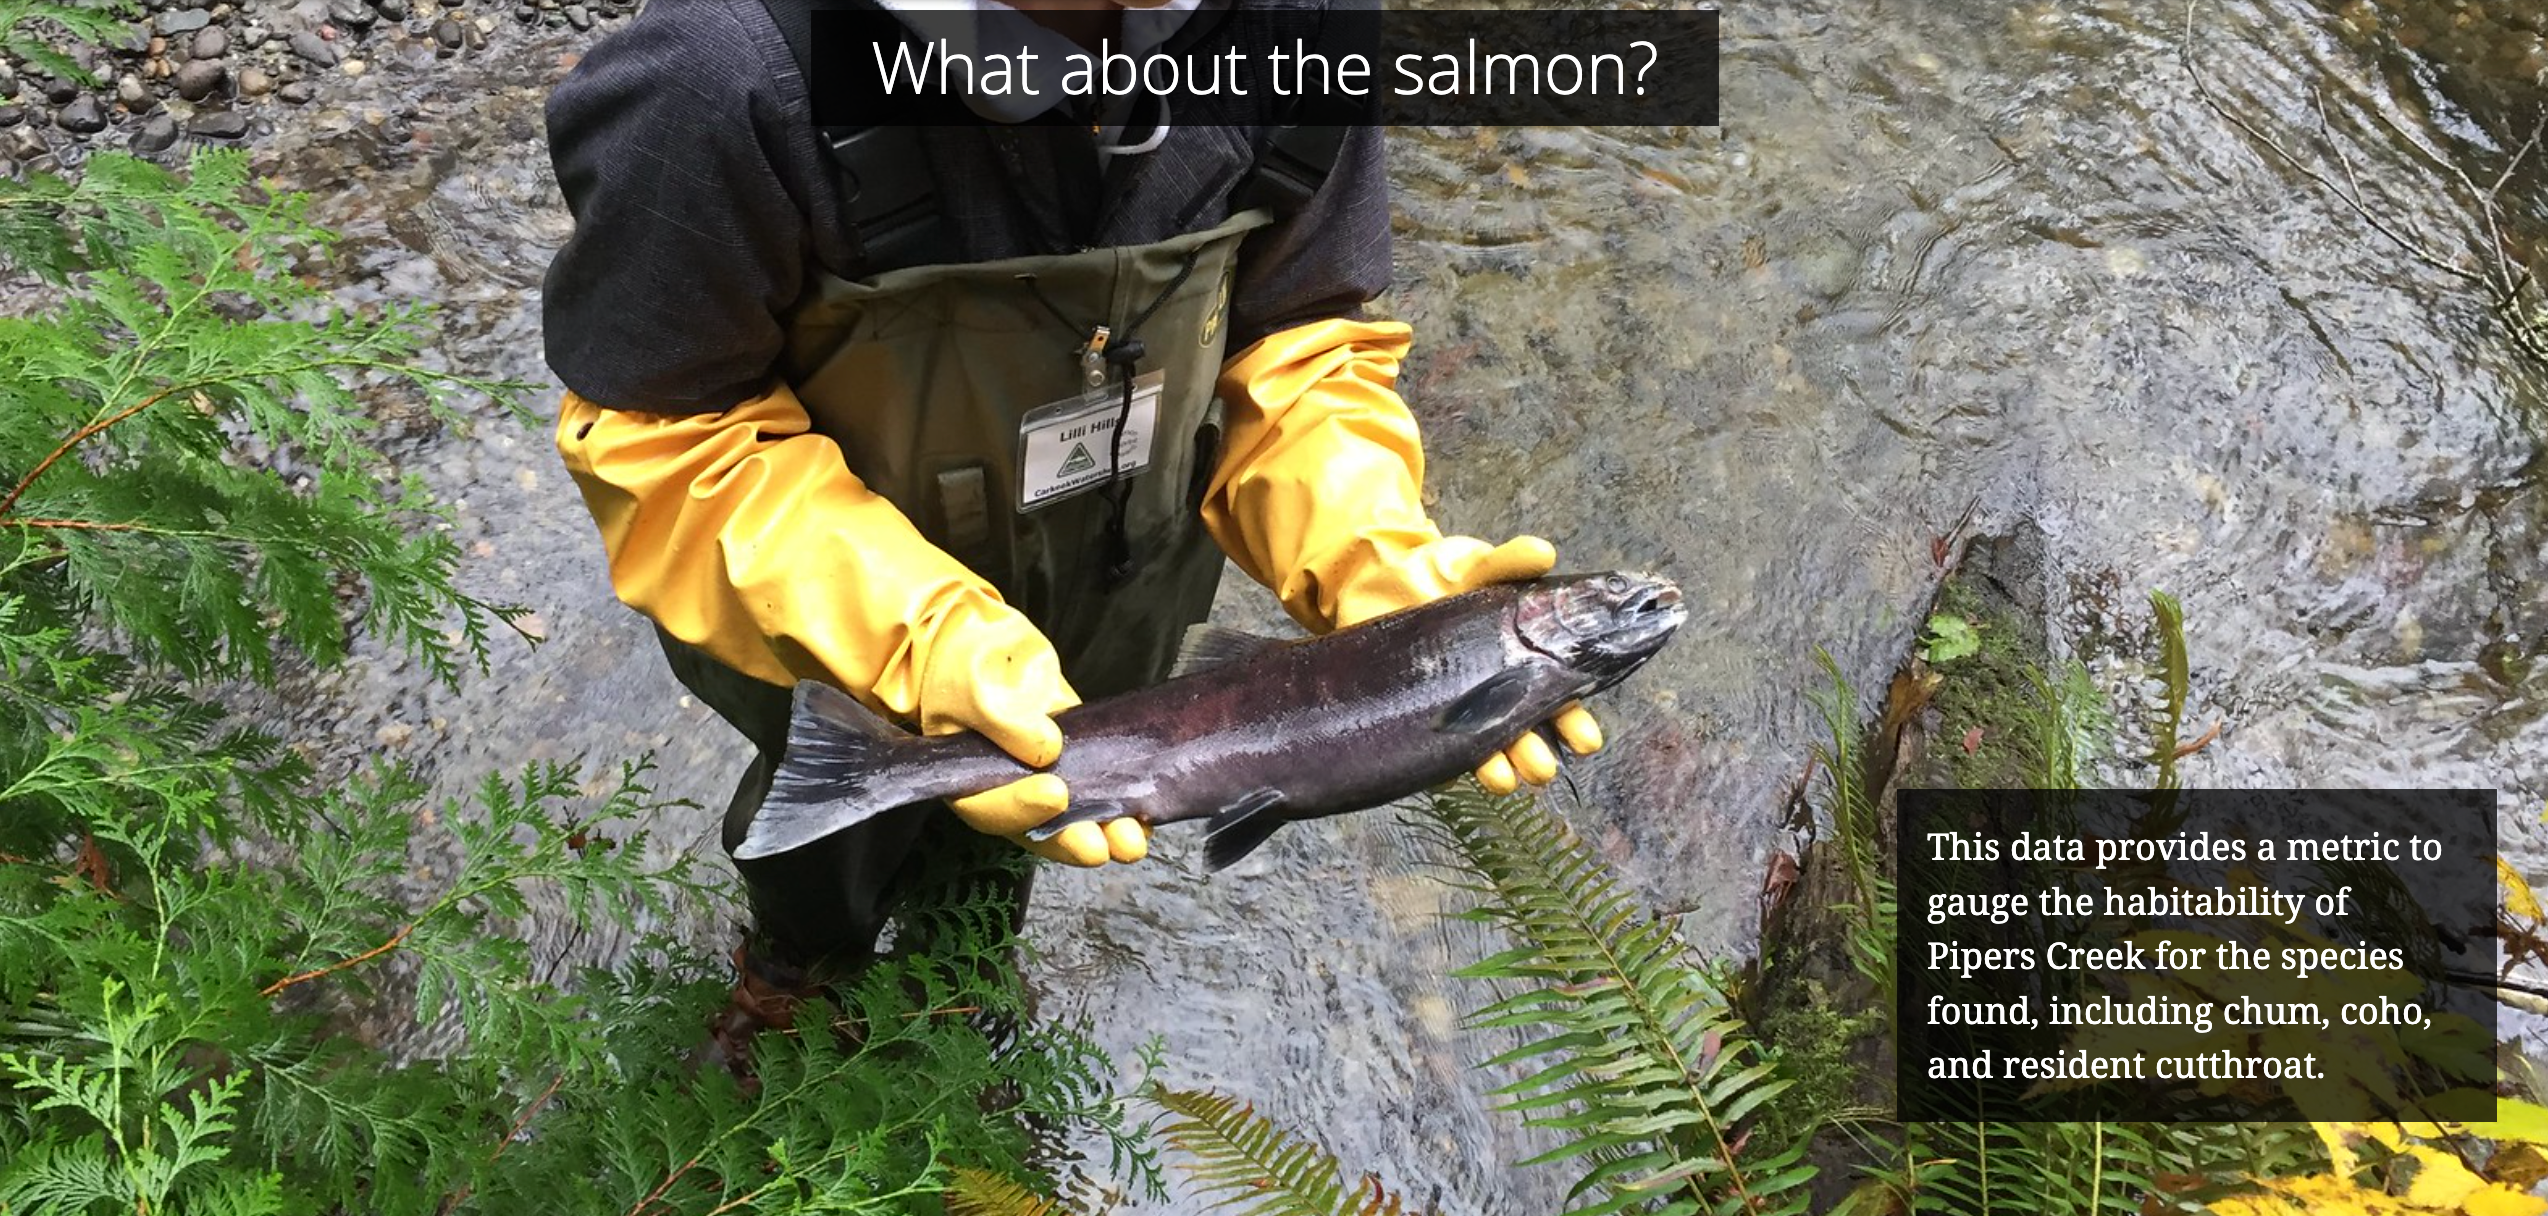 Student holding salmon. Text: Data provides a metric to gauge the habitability of Pipers Creek for chum, coho and resident cutthroat.